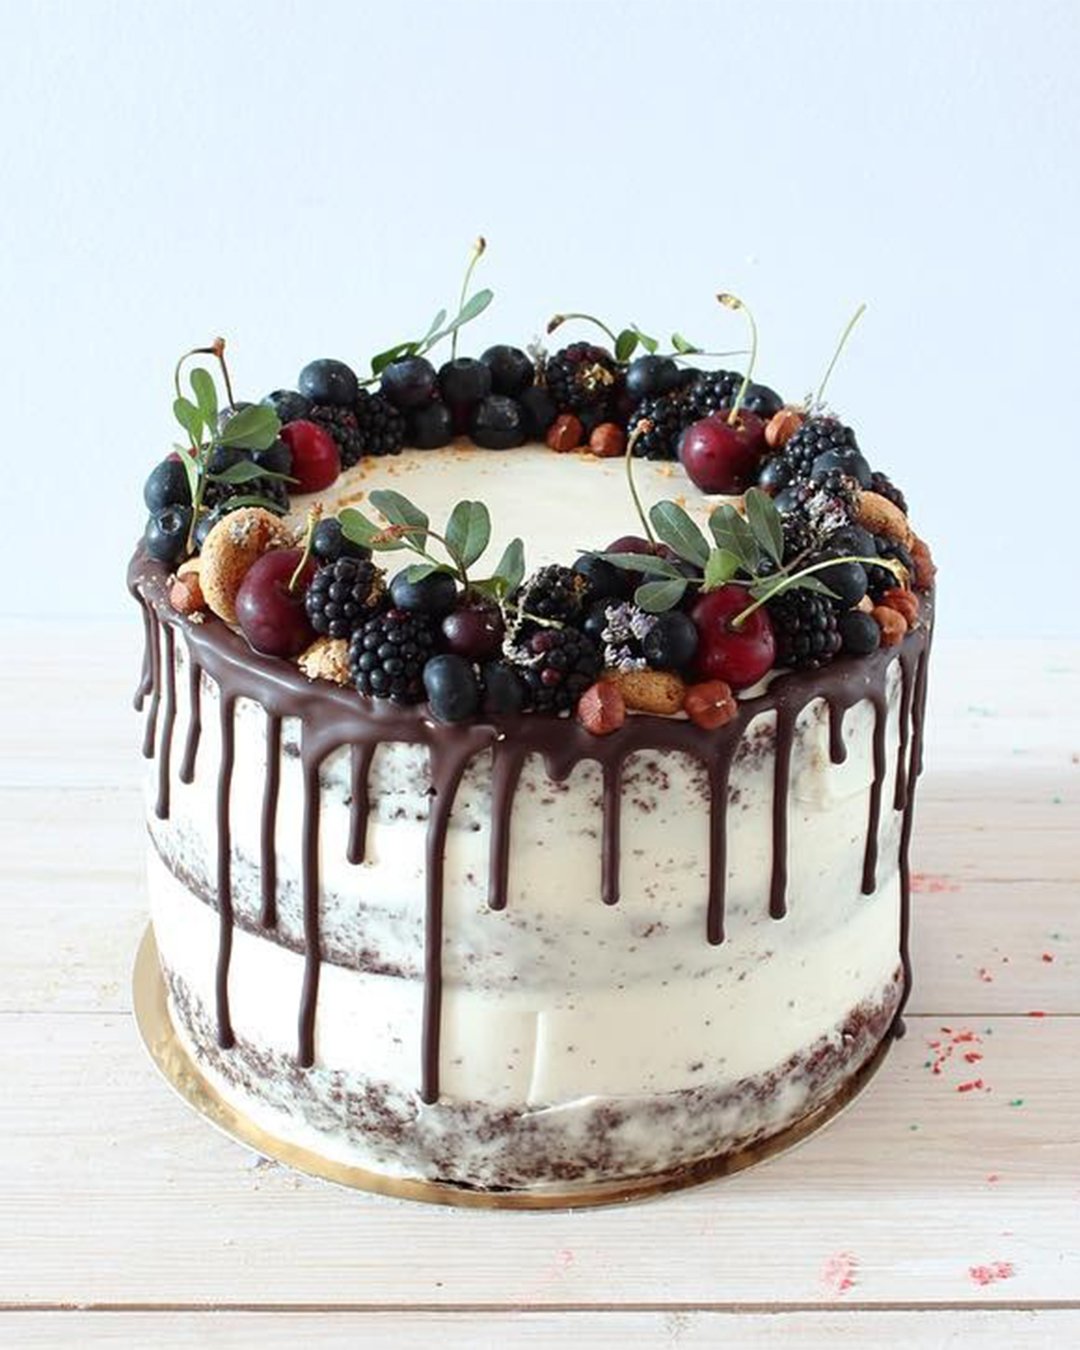 small rustic wedding cakes small tasty cakes with berries